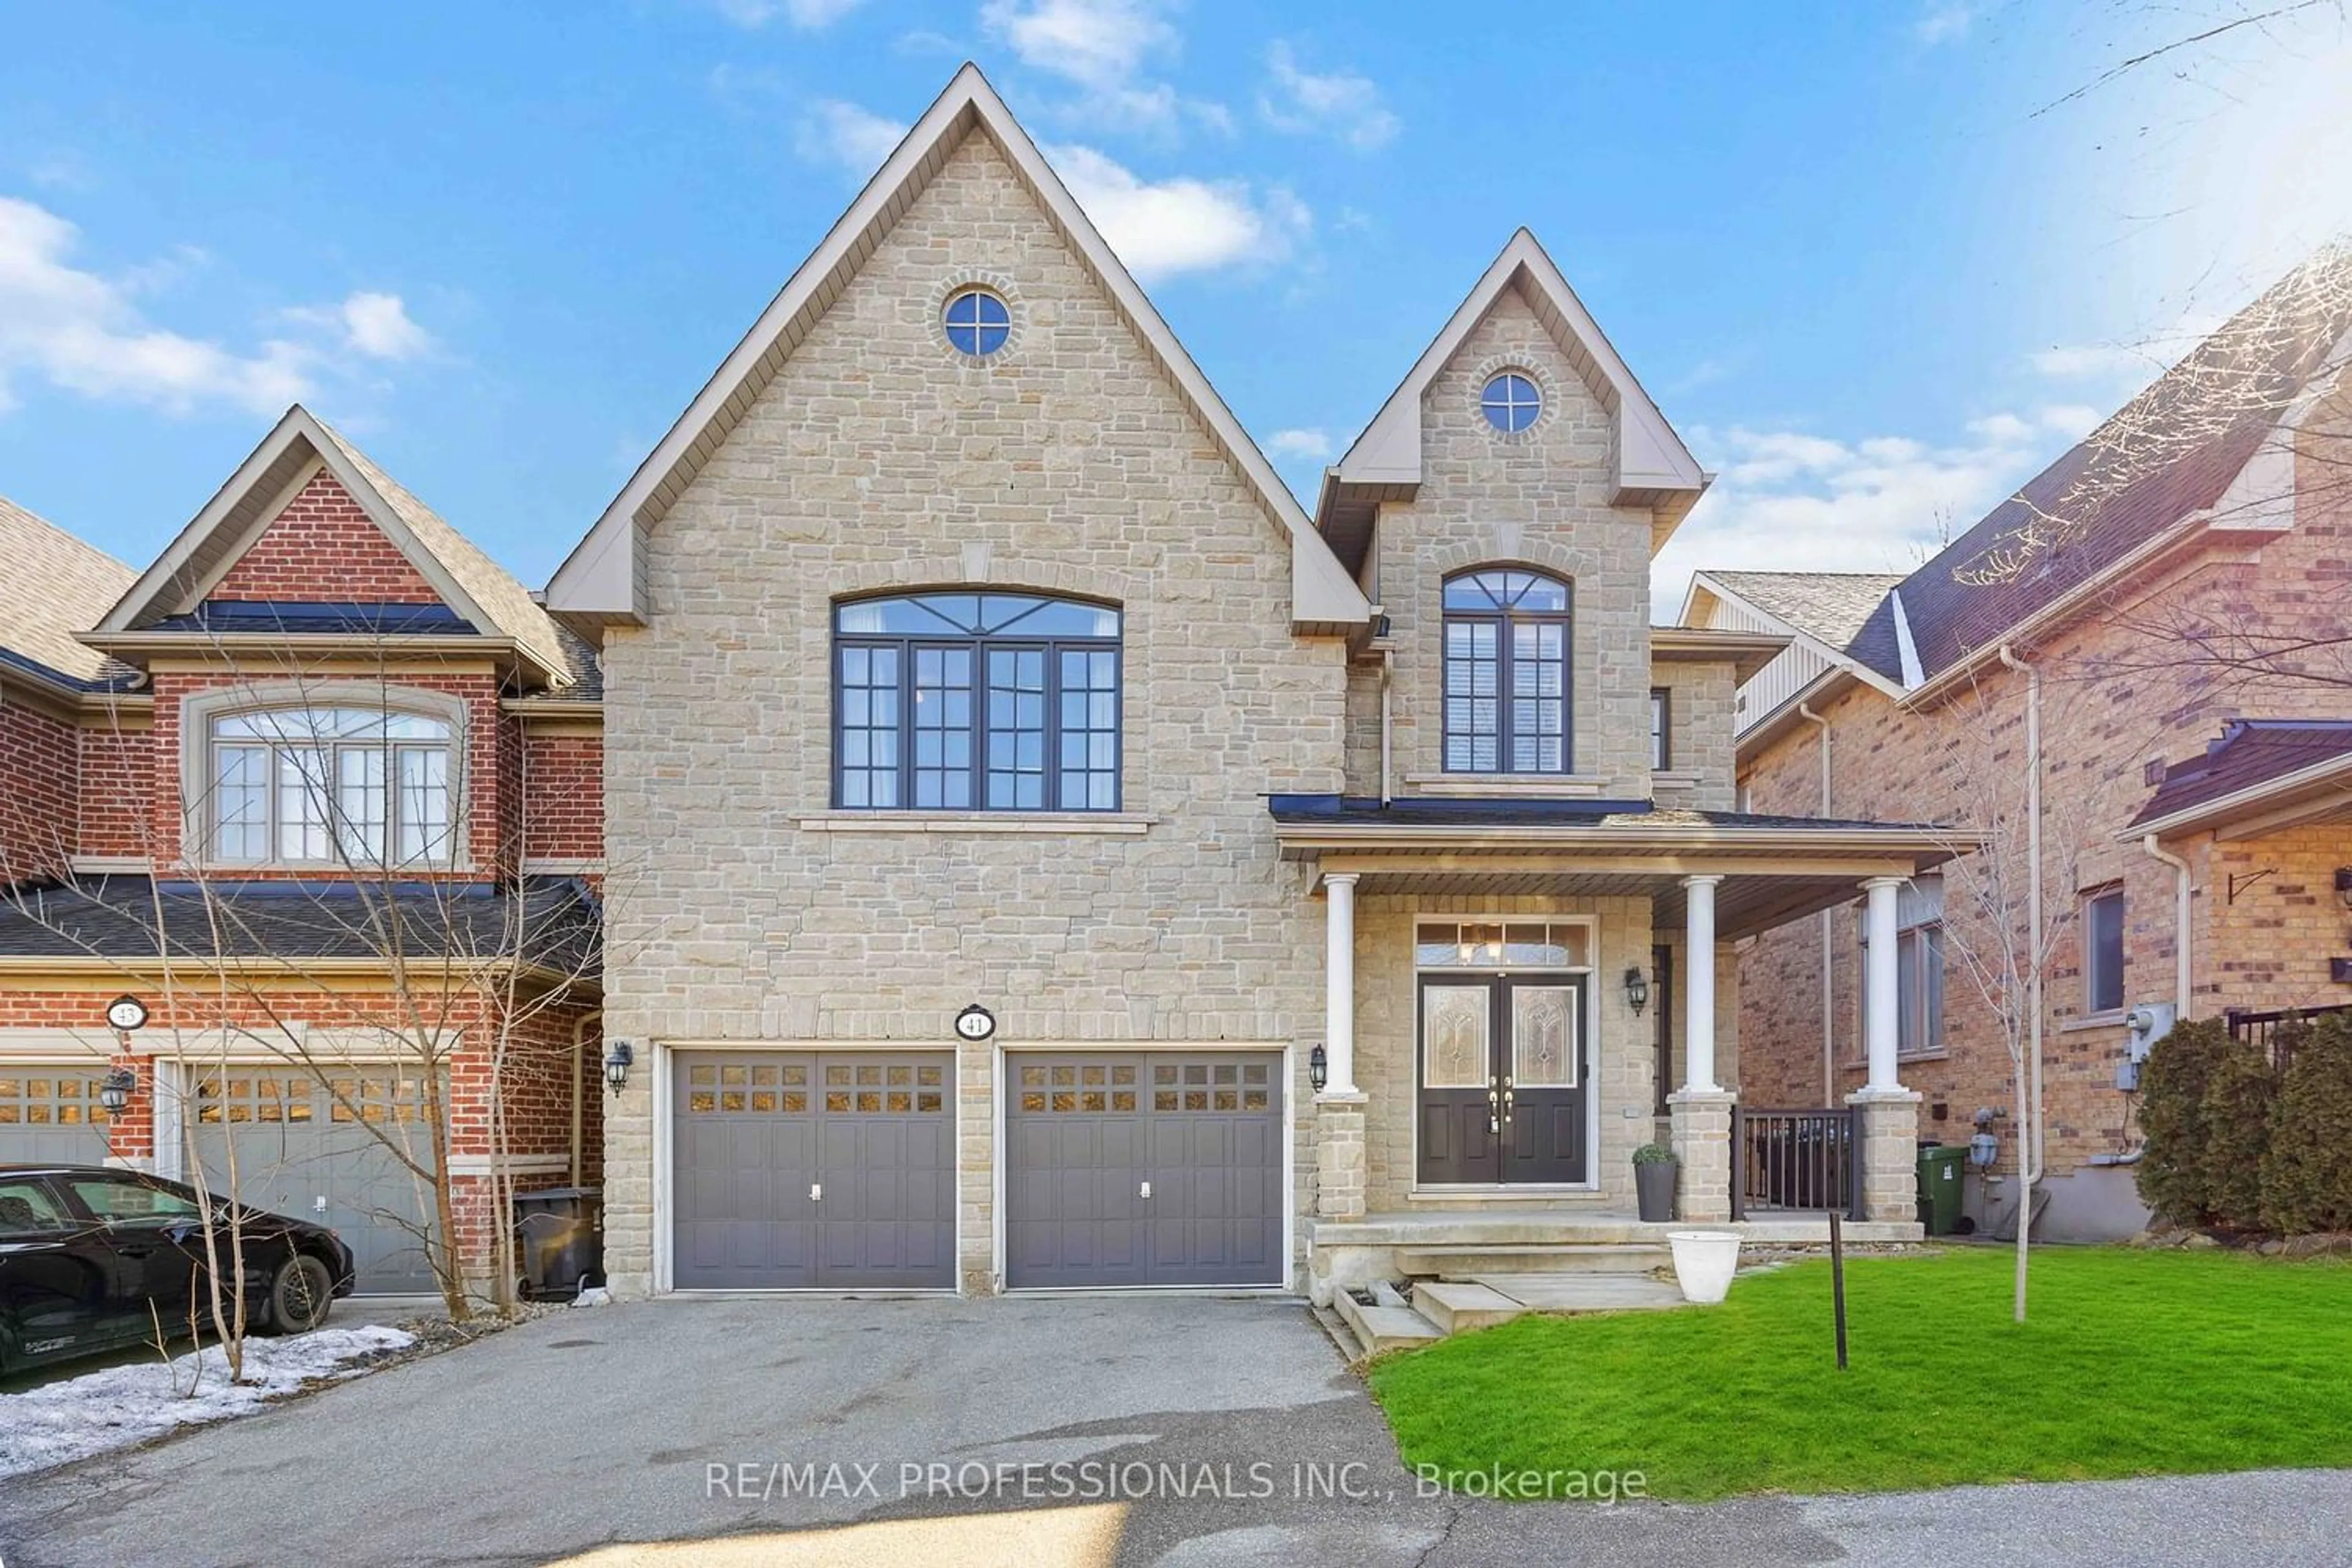 Home with brick exterior material for 41 St Phillips Rd, Toronto Ontario M9P 2N7